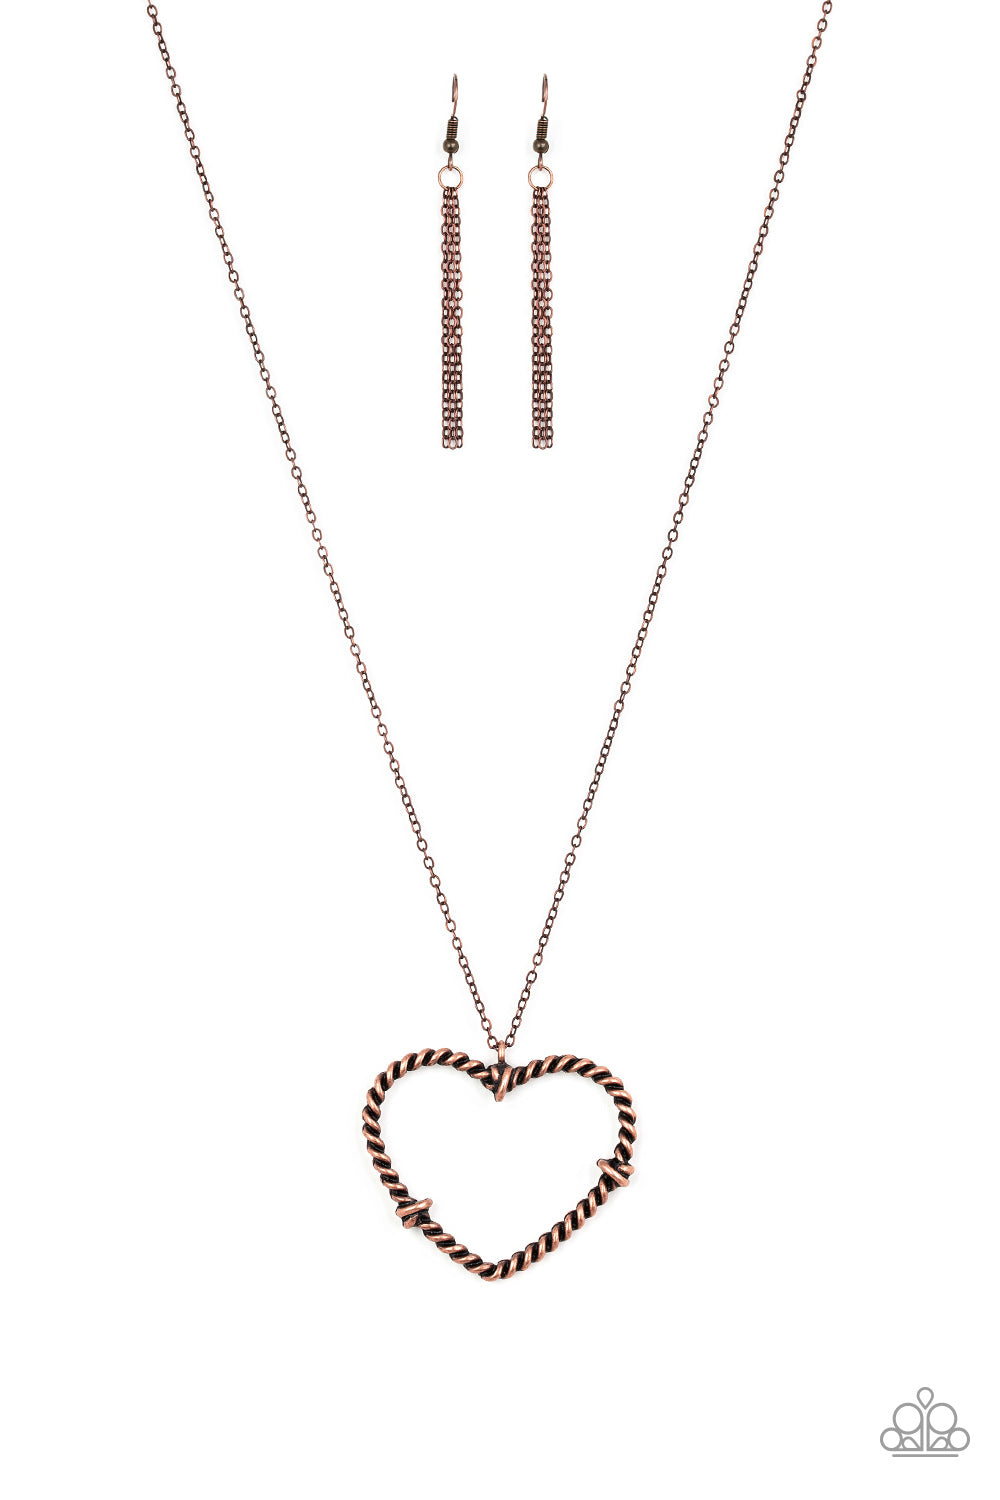 Straight From The Heart - copper - Paparazzi necklace